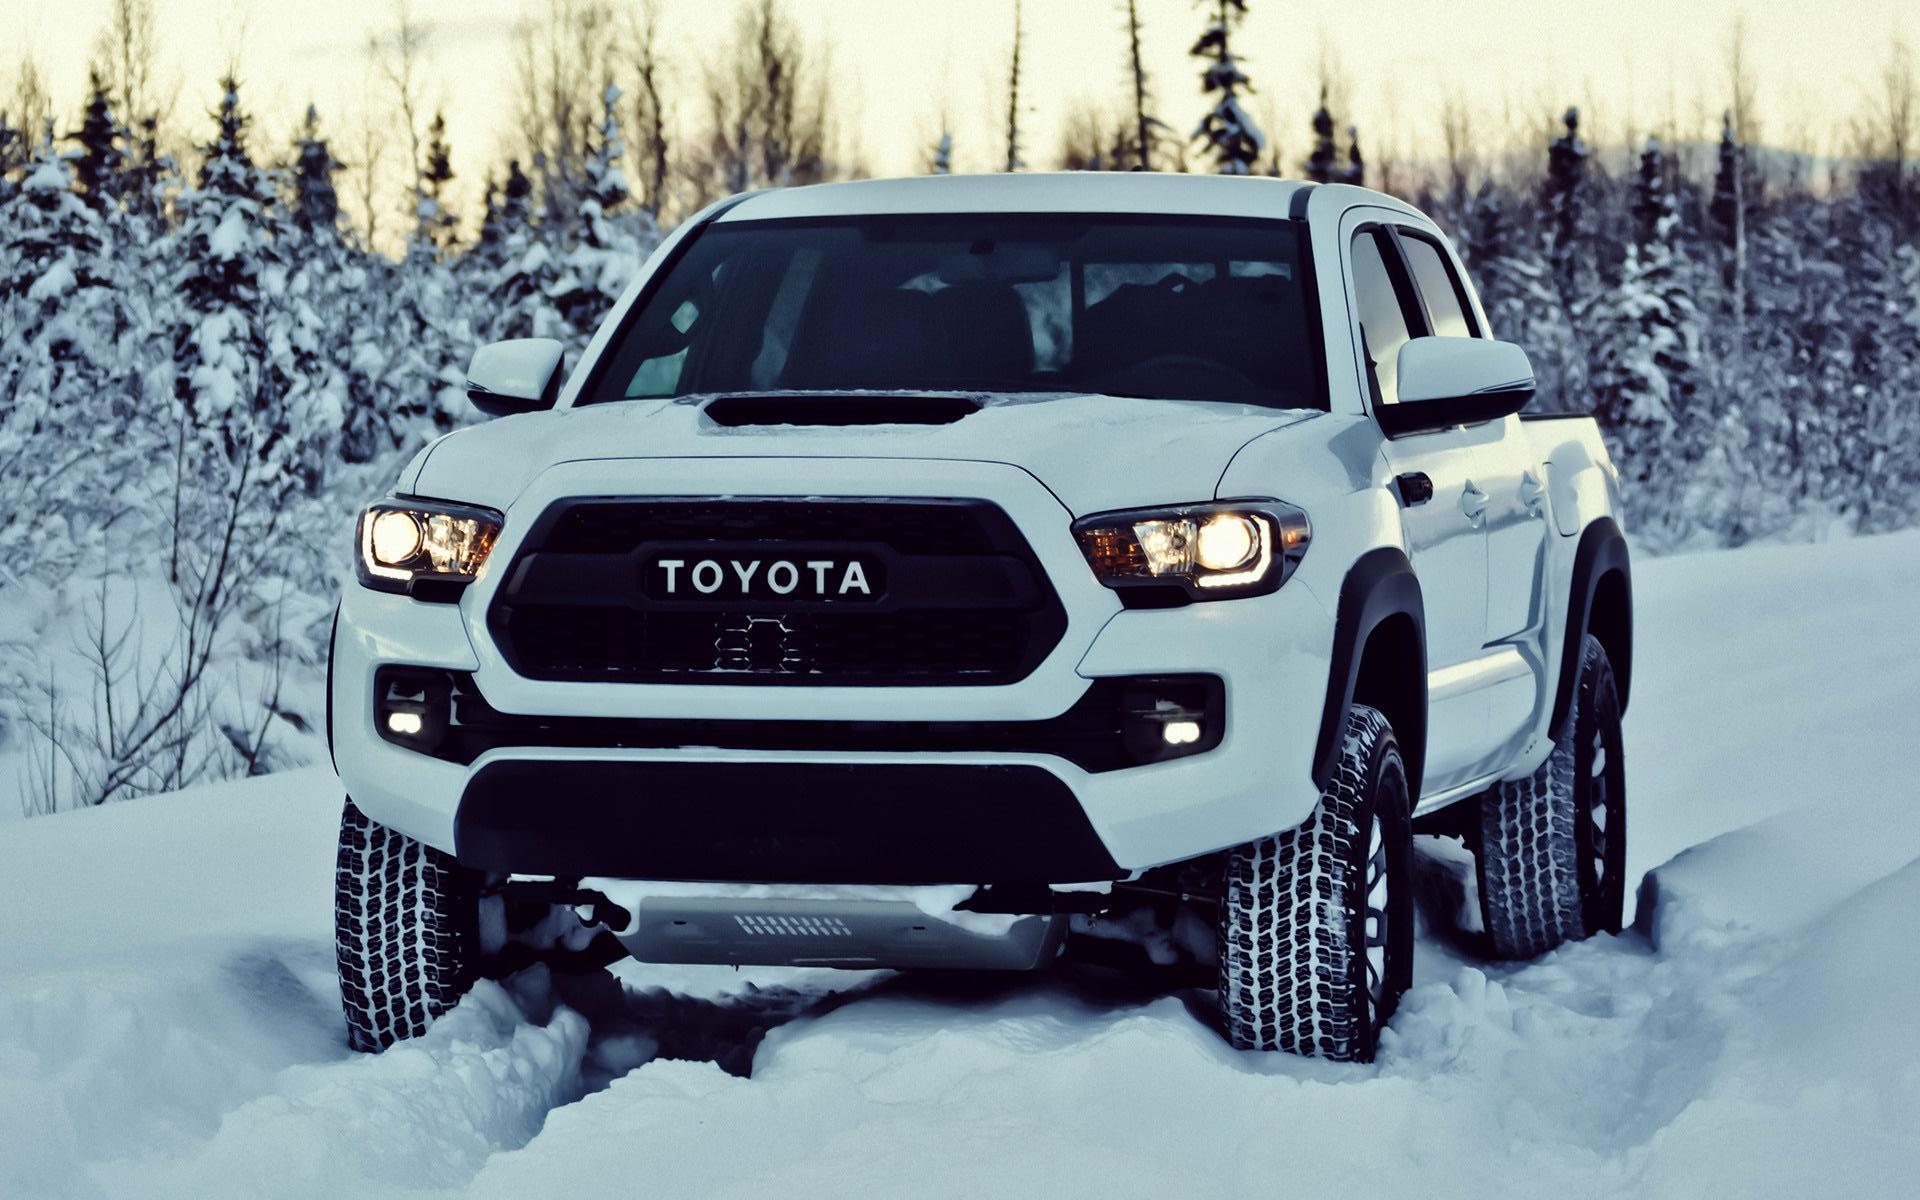 COOL TOYOTA TACOMA WALLPAPERS